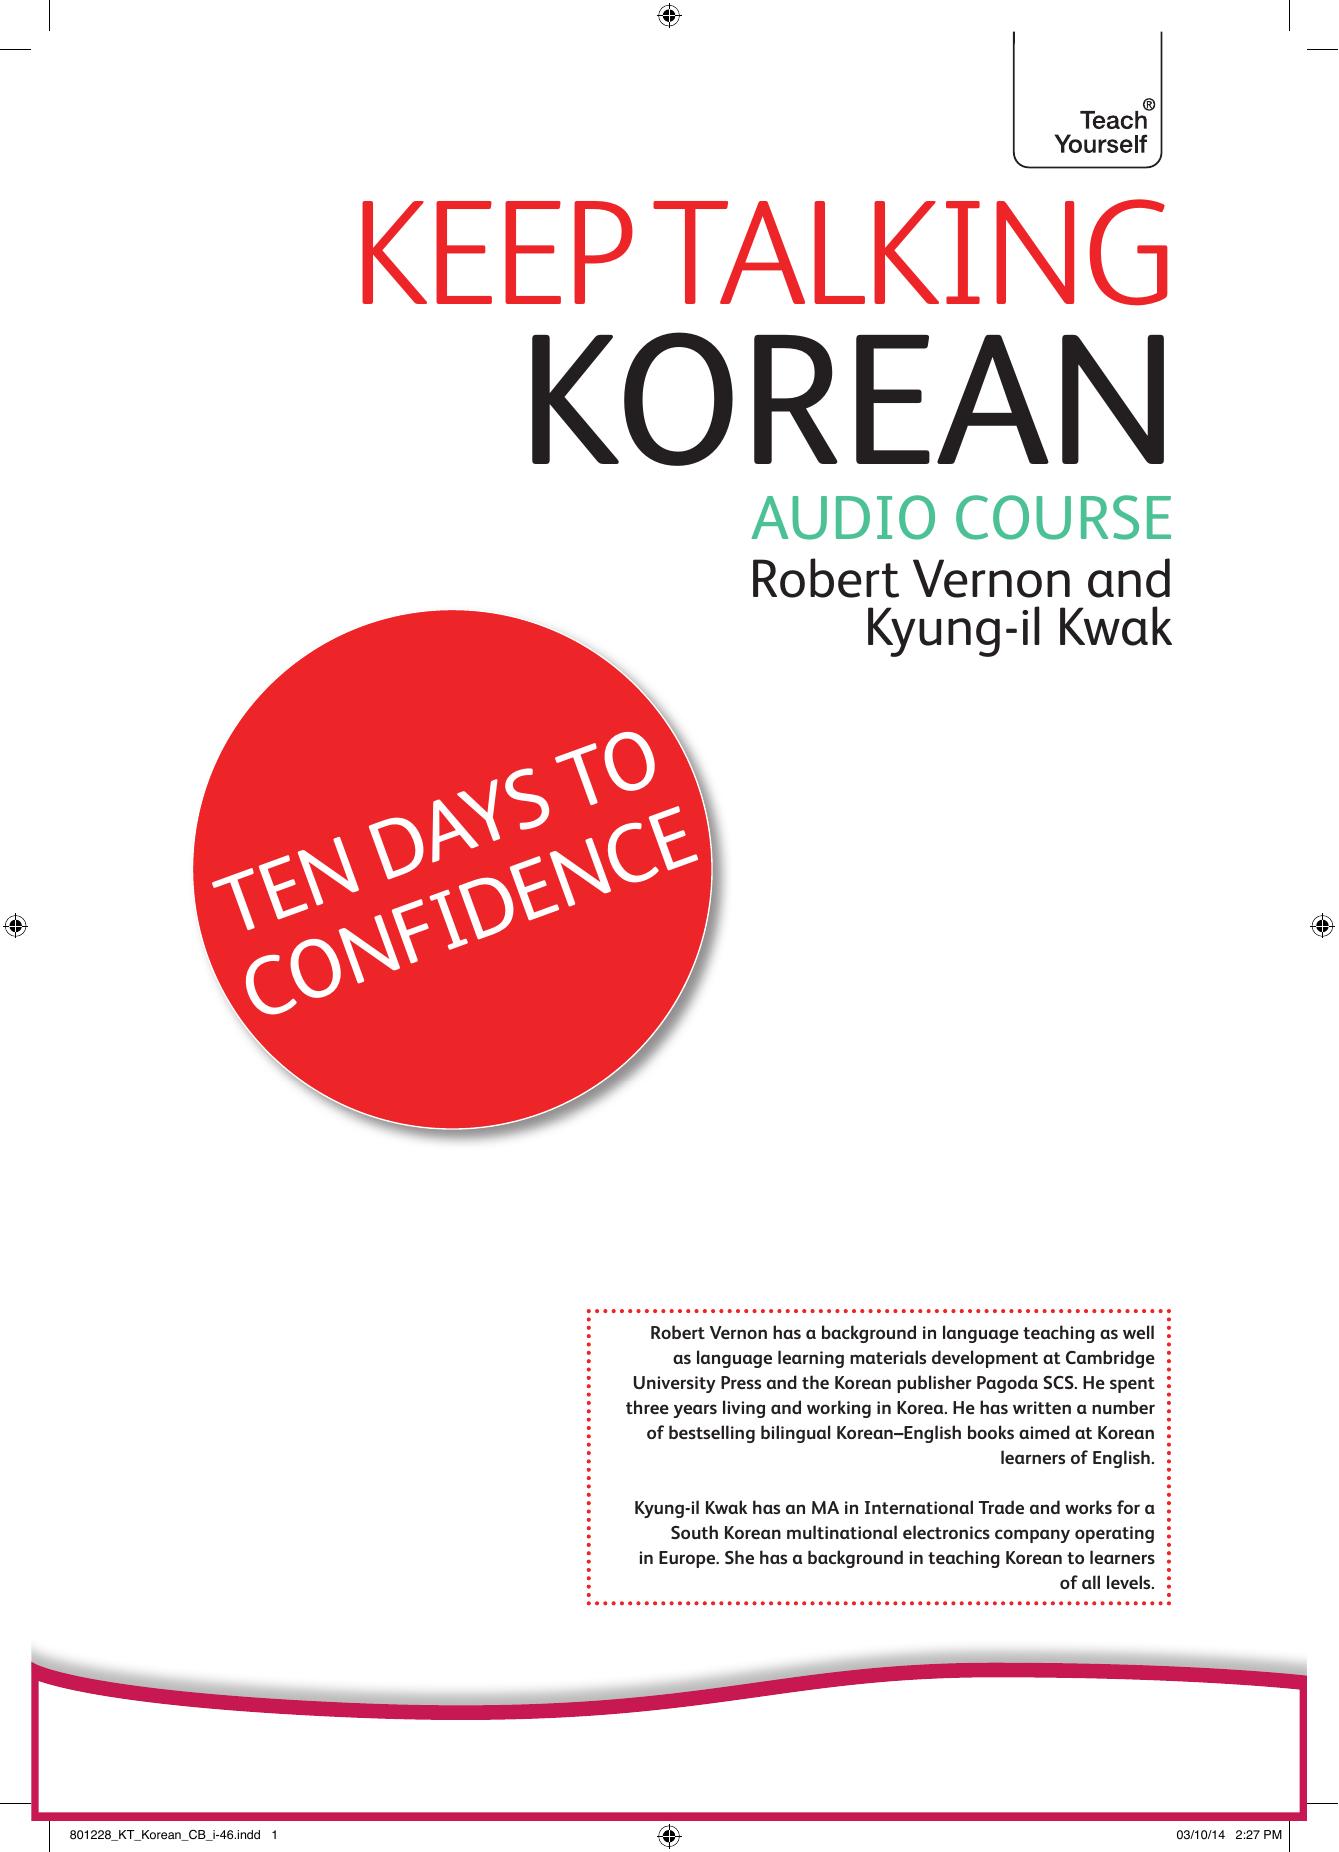 Keep Talking Korean Audio Course - Ten Days to Confidence: (Audio pack) Advanced beginner's guide to speaking and understanding with confidence (Teach Yourself) by Robert Vernon Kyung-Il Kwak